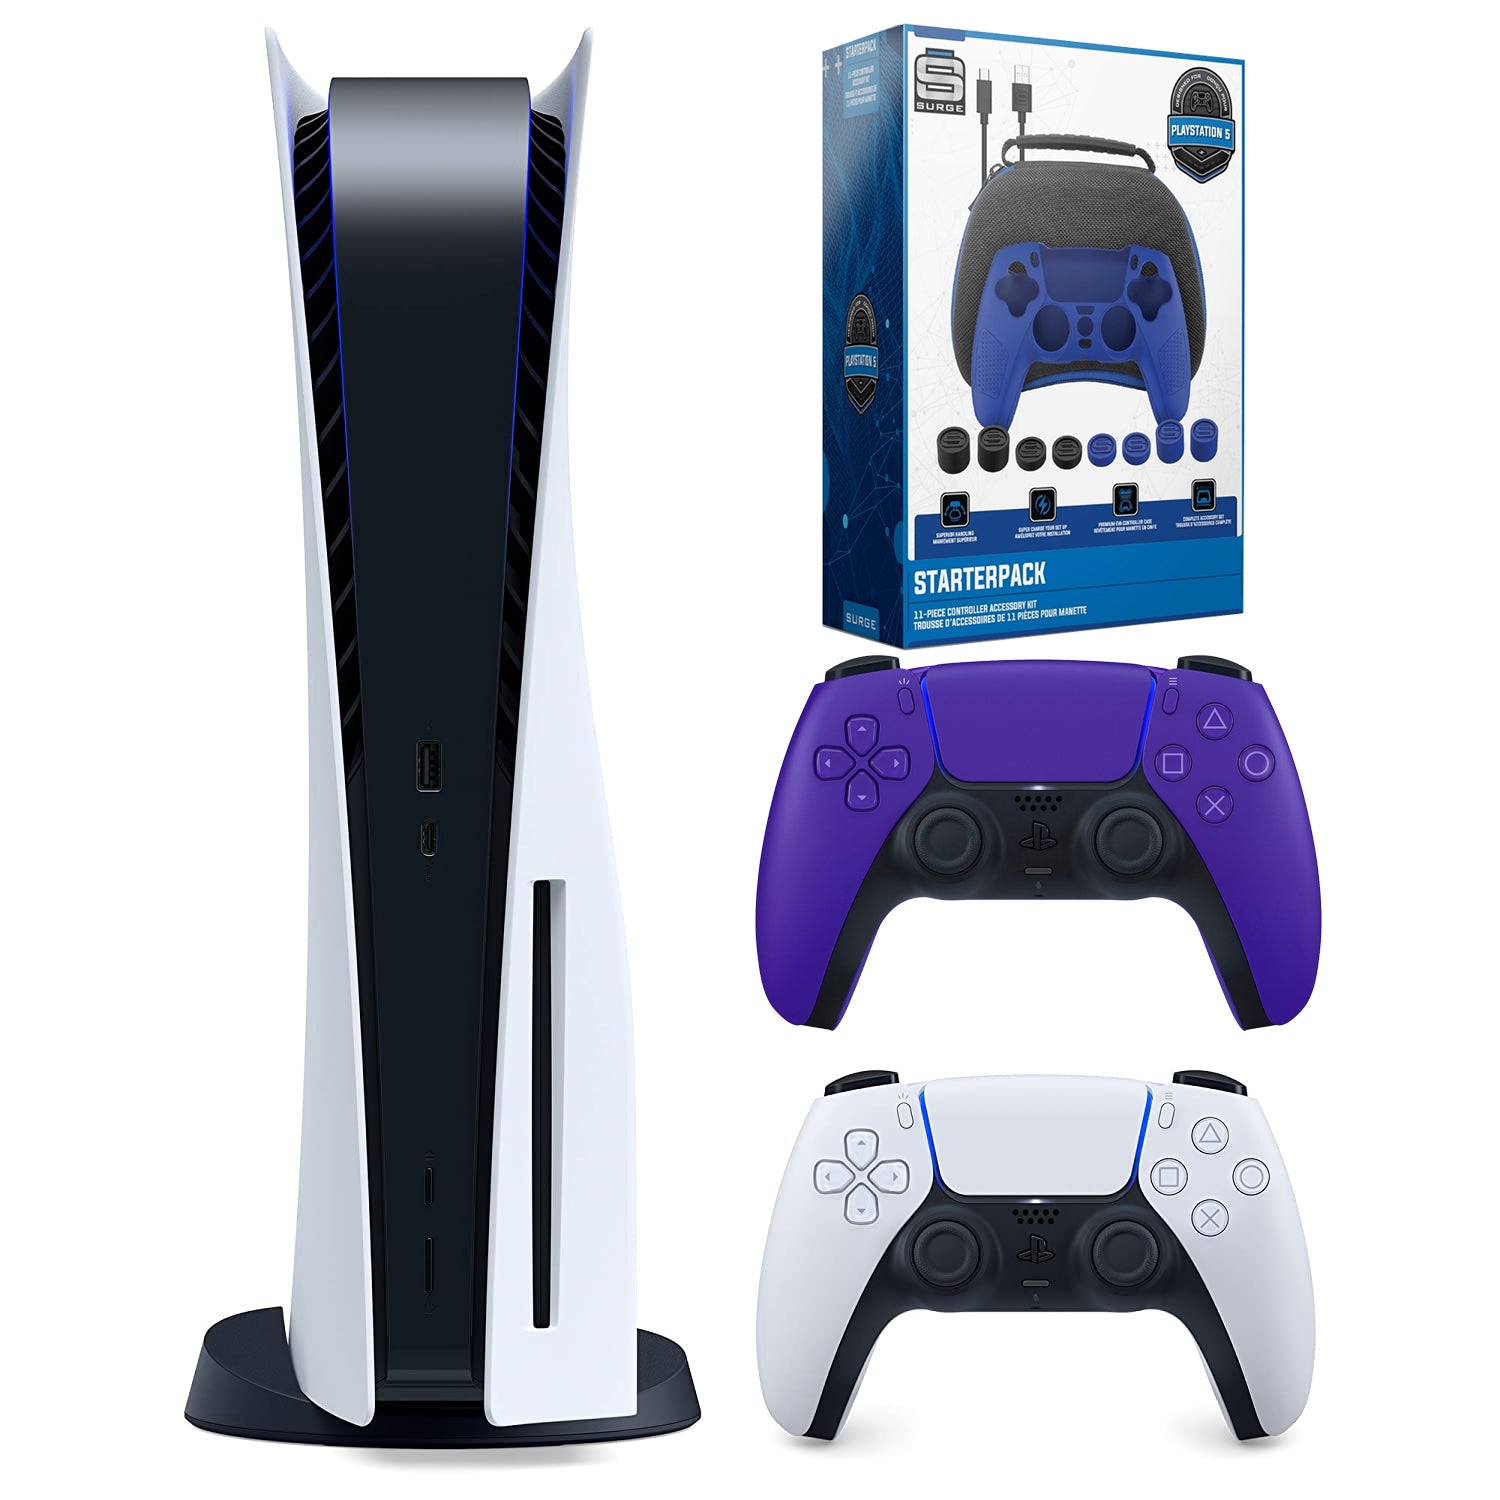 Sony Playstation 5 Disc Version (Sony PS5 Disc) with Extra Controller and Pro Gamer Starter Pack - Galactic Purple Bundle - Pro-Distributing